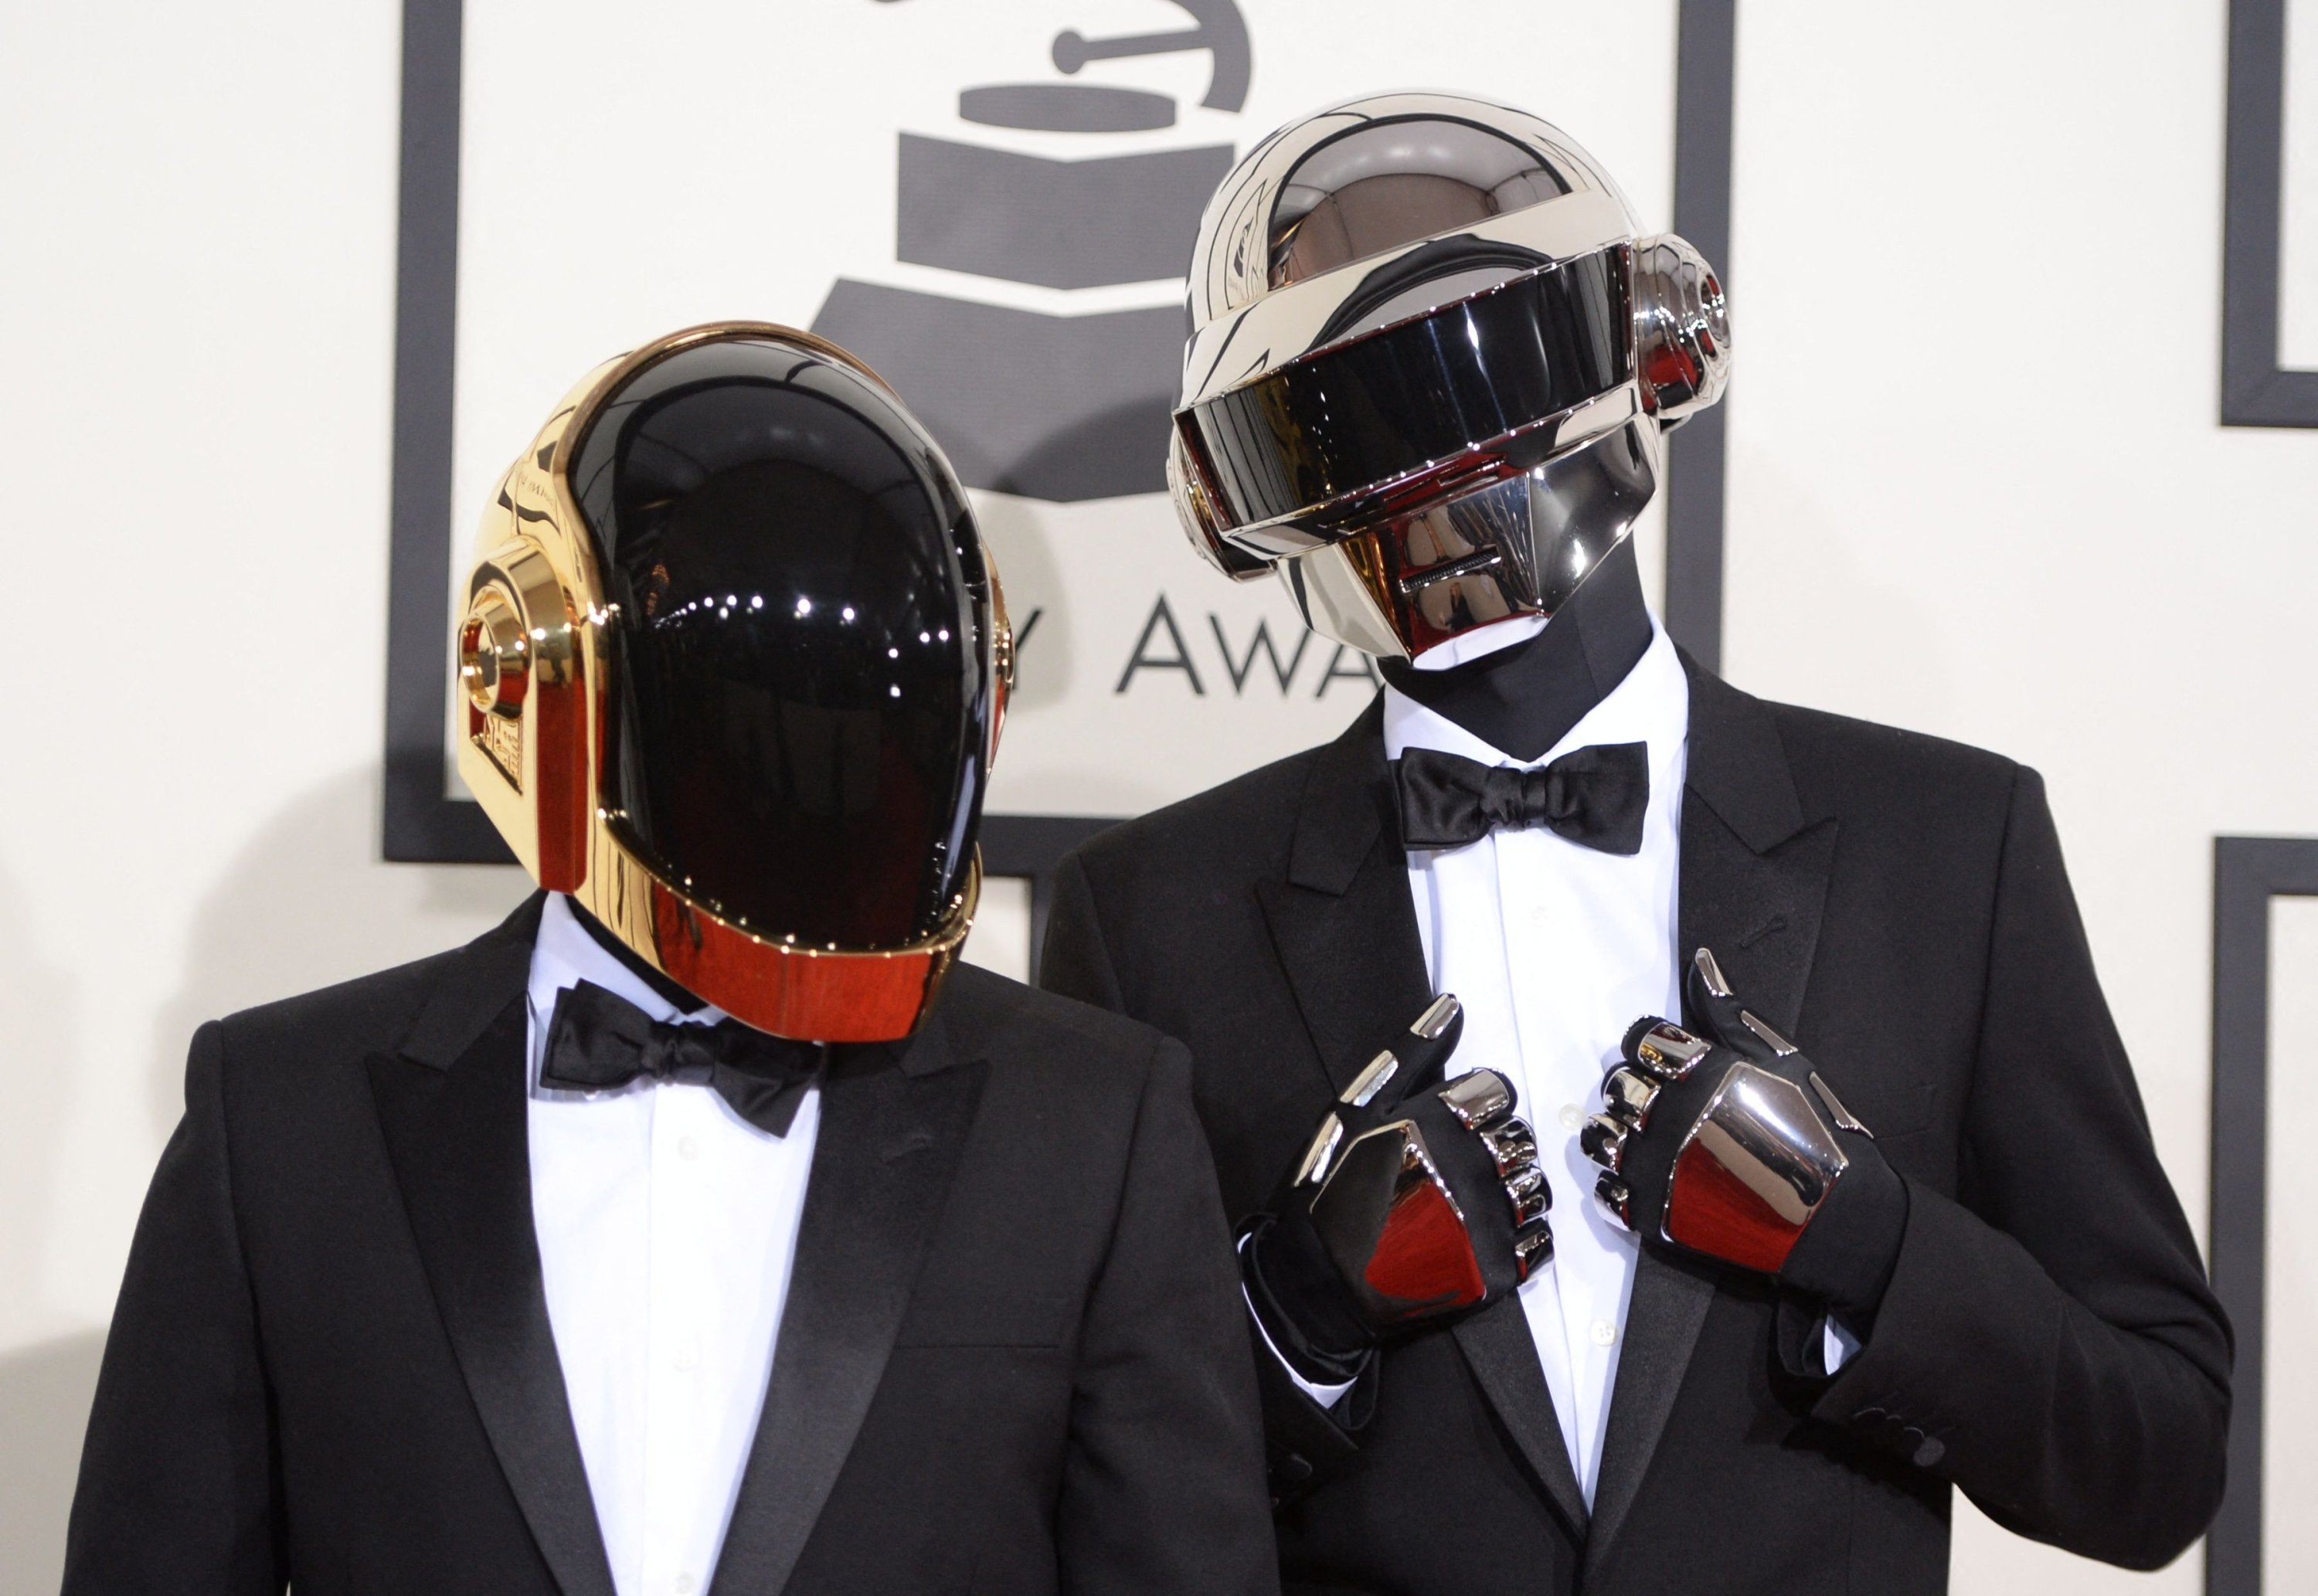 Electronic Music Duo Daft Punk Break Up After 28 Years | Daily Sabah